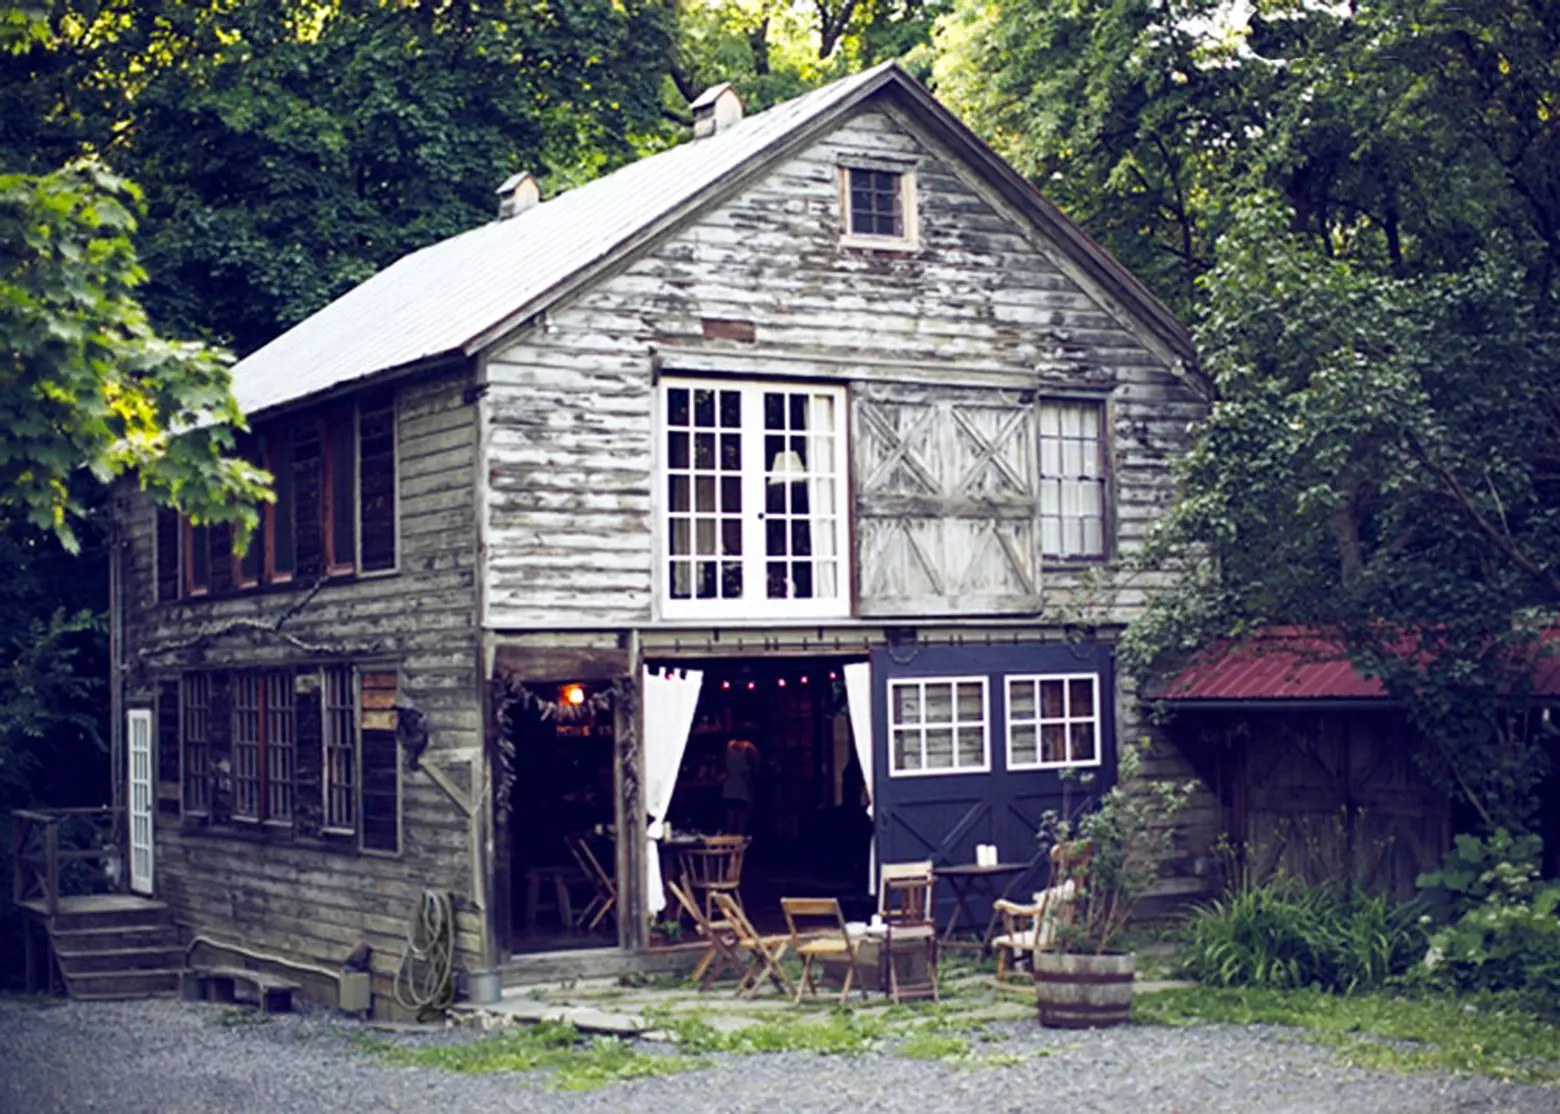 Rent a Charming Upstate Barn Home Beautifully Renovated by Local Artisans